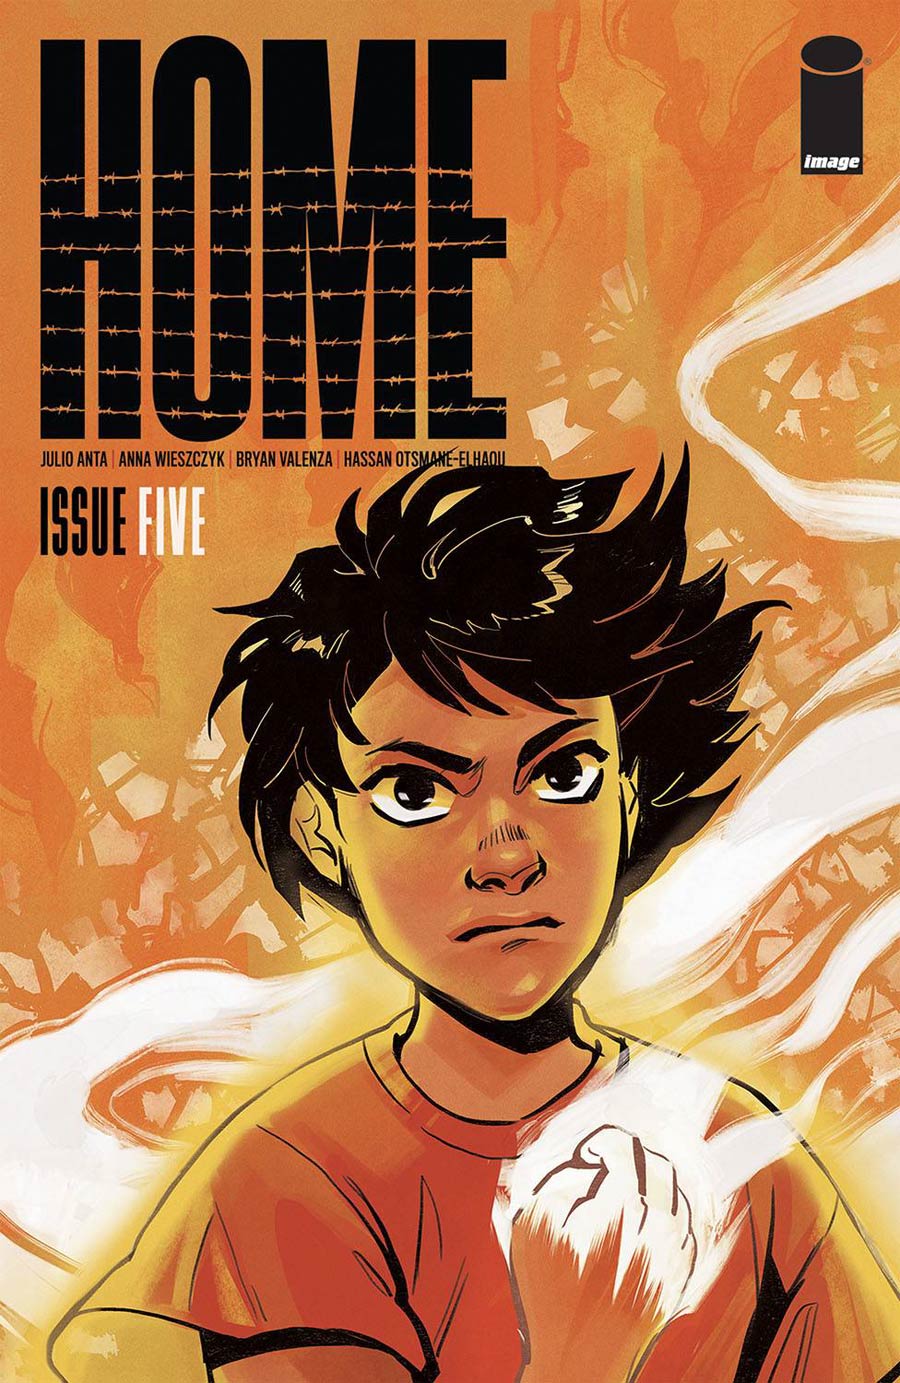 Home (Image Comics) #5 Cover A Regular Lisa Sterle Cover